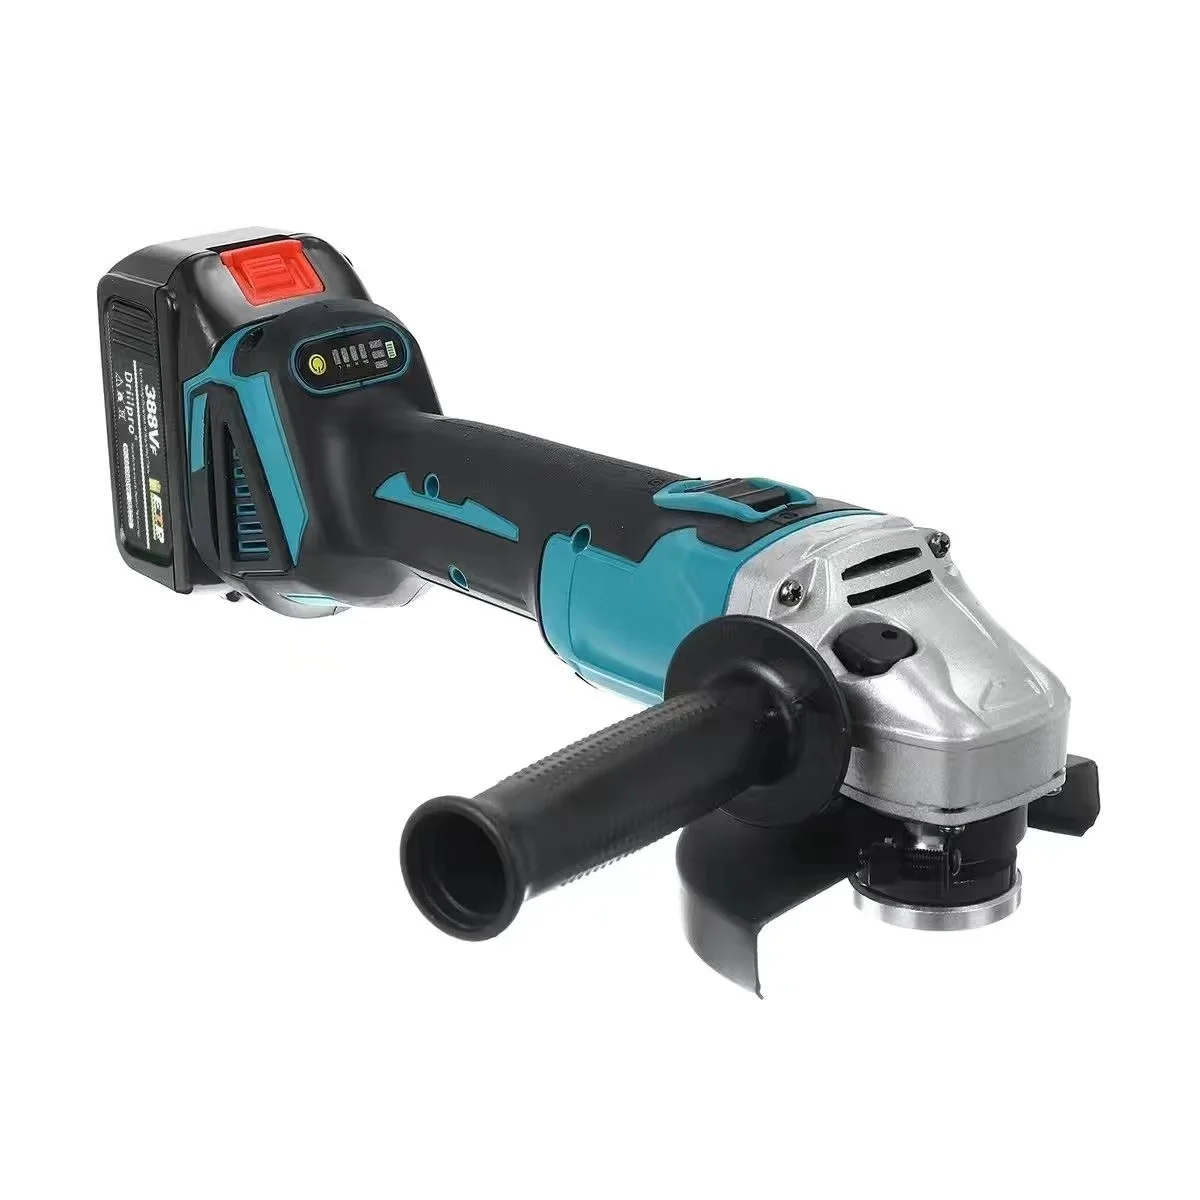 18V 100mm Brushless Impact Angle Grinder Cordless Cutting Machine Polisher Power Tools compatible For Makita Battery brushless cordless rechargeable angle grinder 100mm for 18v makita battery diy power tool saw blade cutting machine polisher